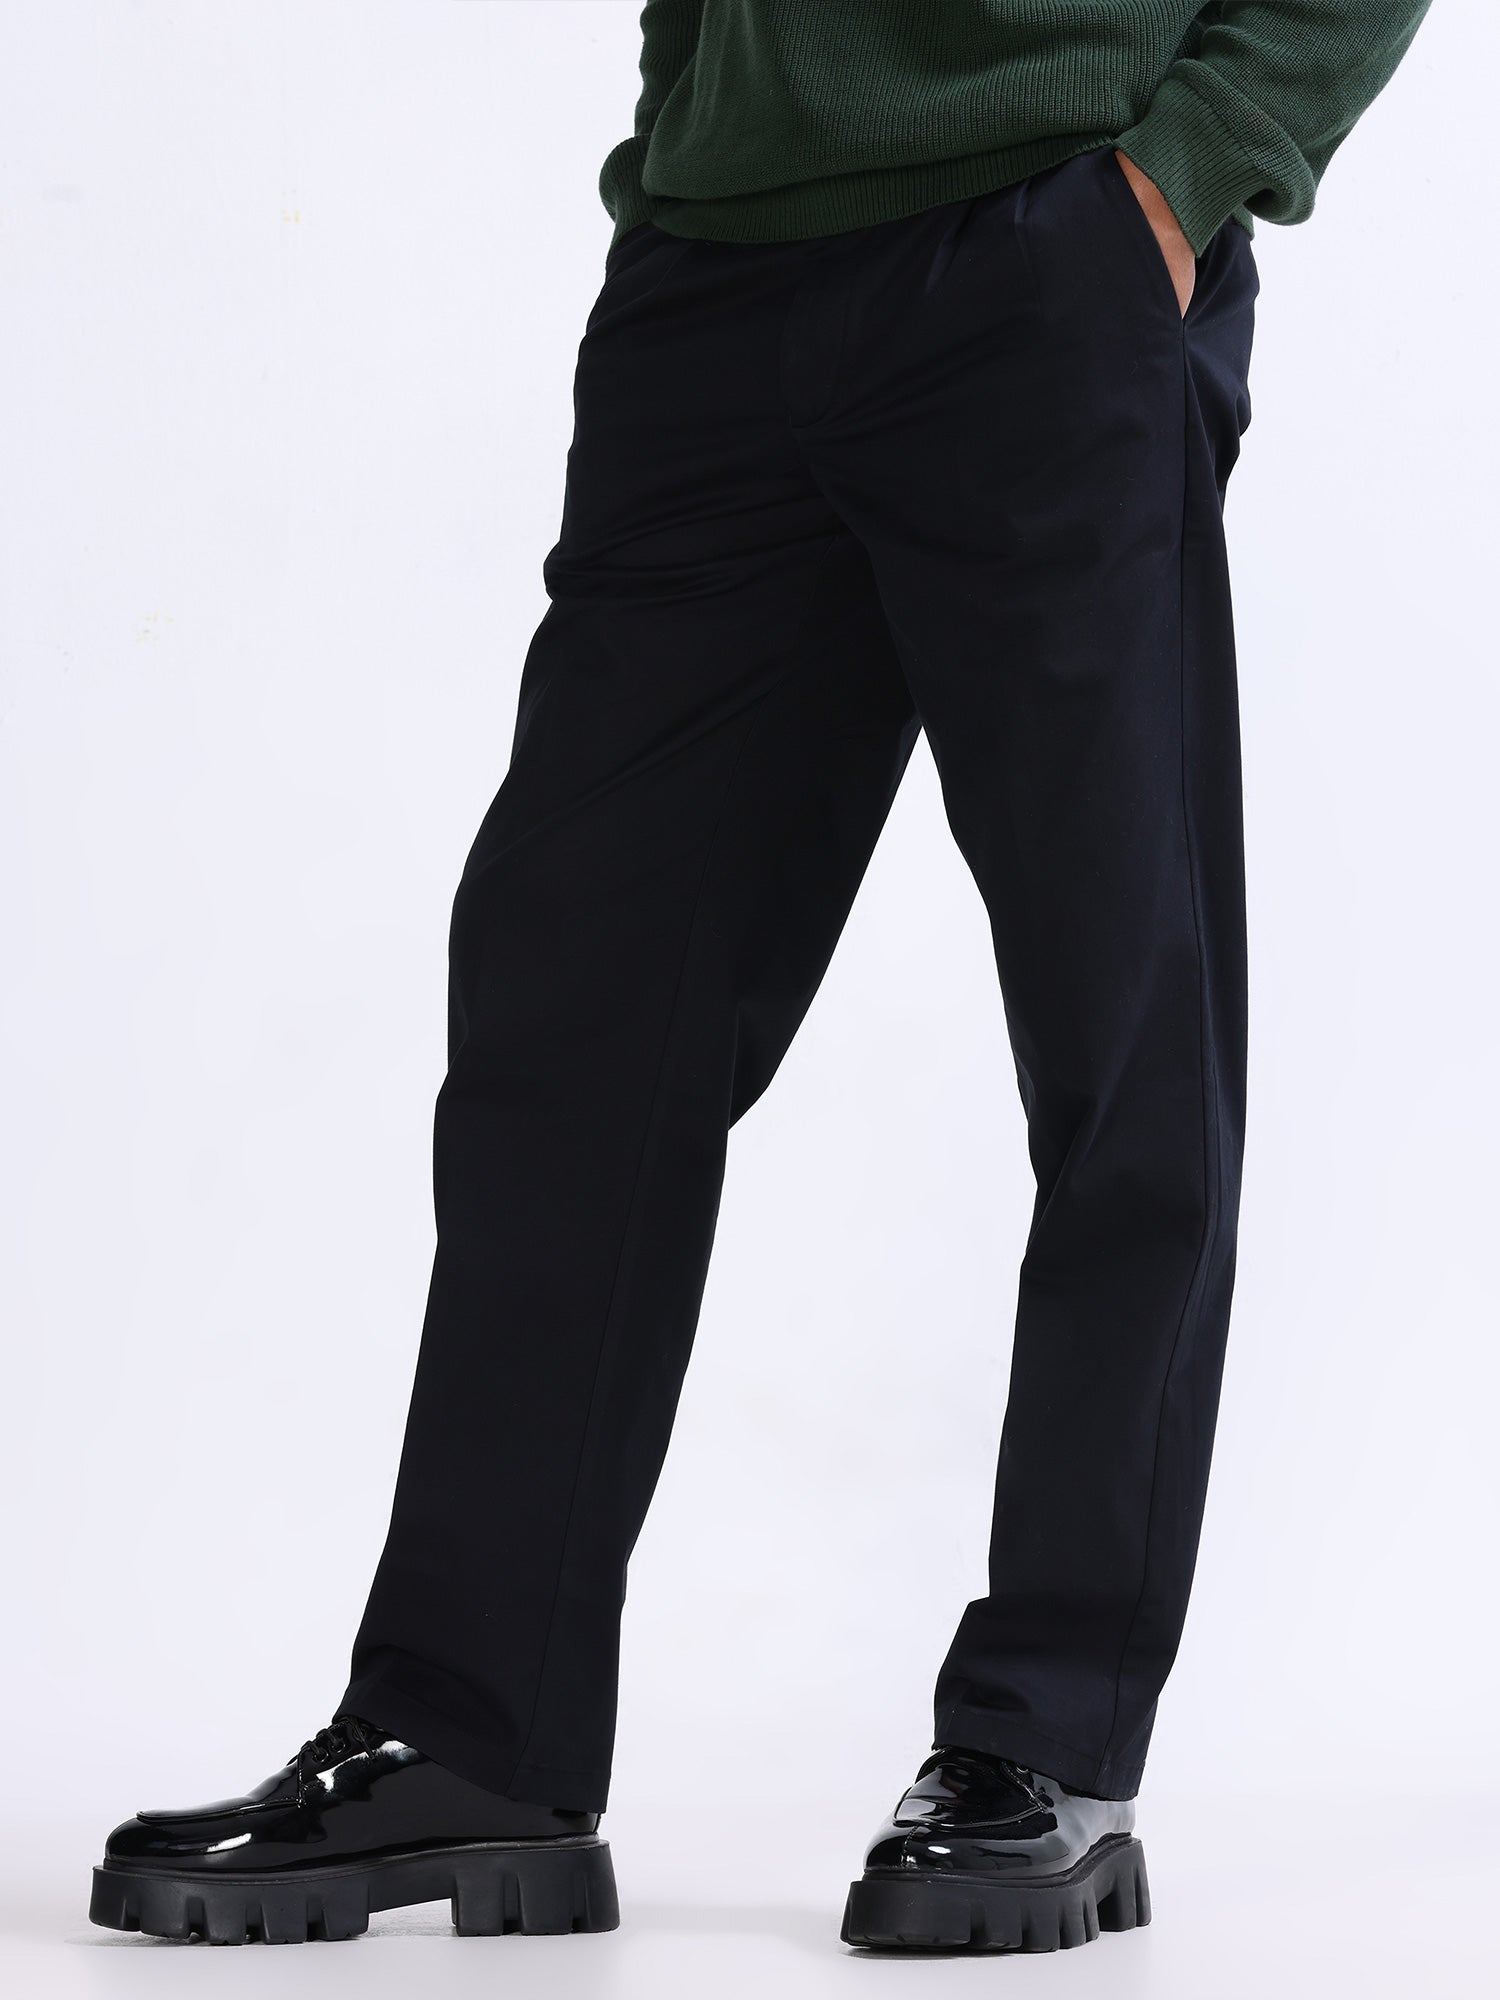 Buy Men Trousers & Pants Online in India - Up to 75% OFF